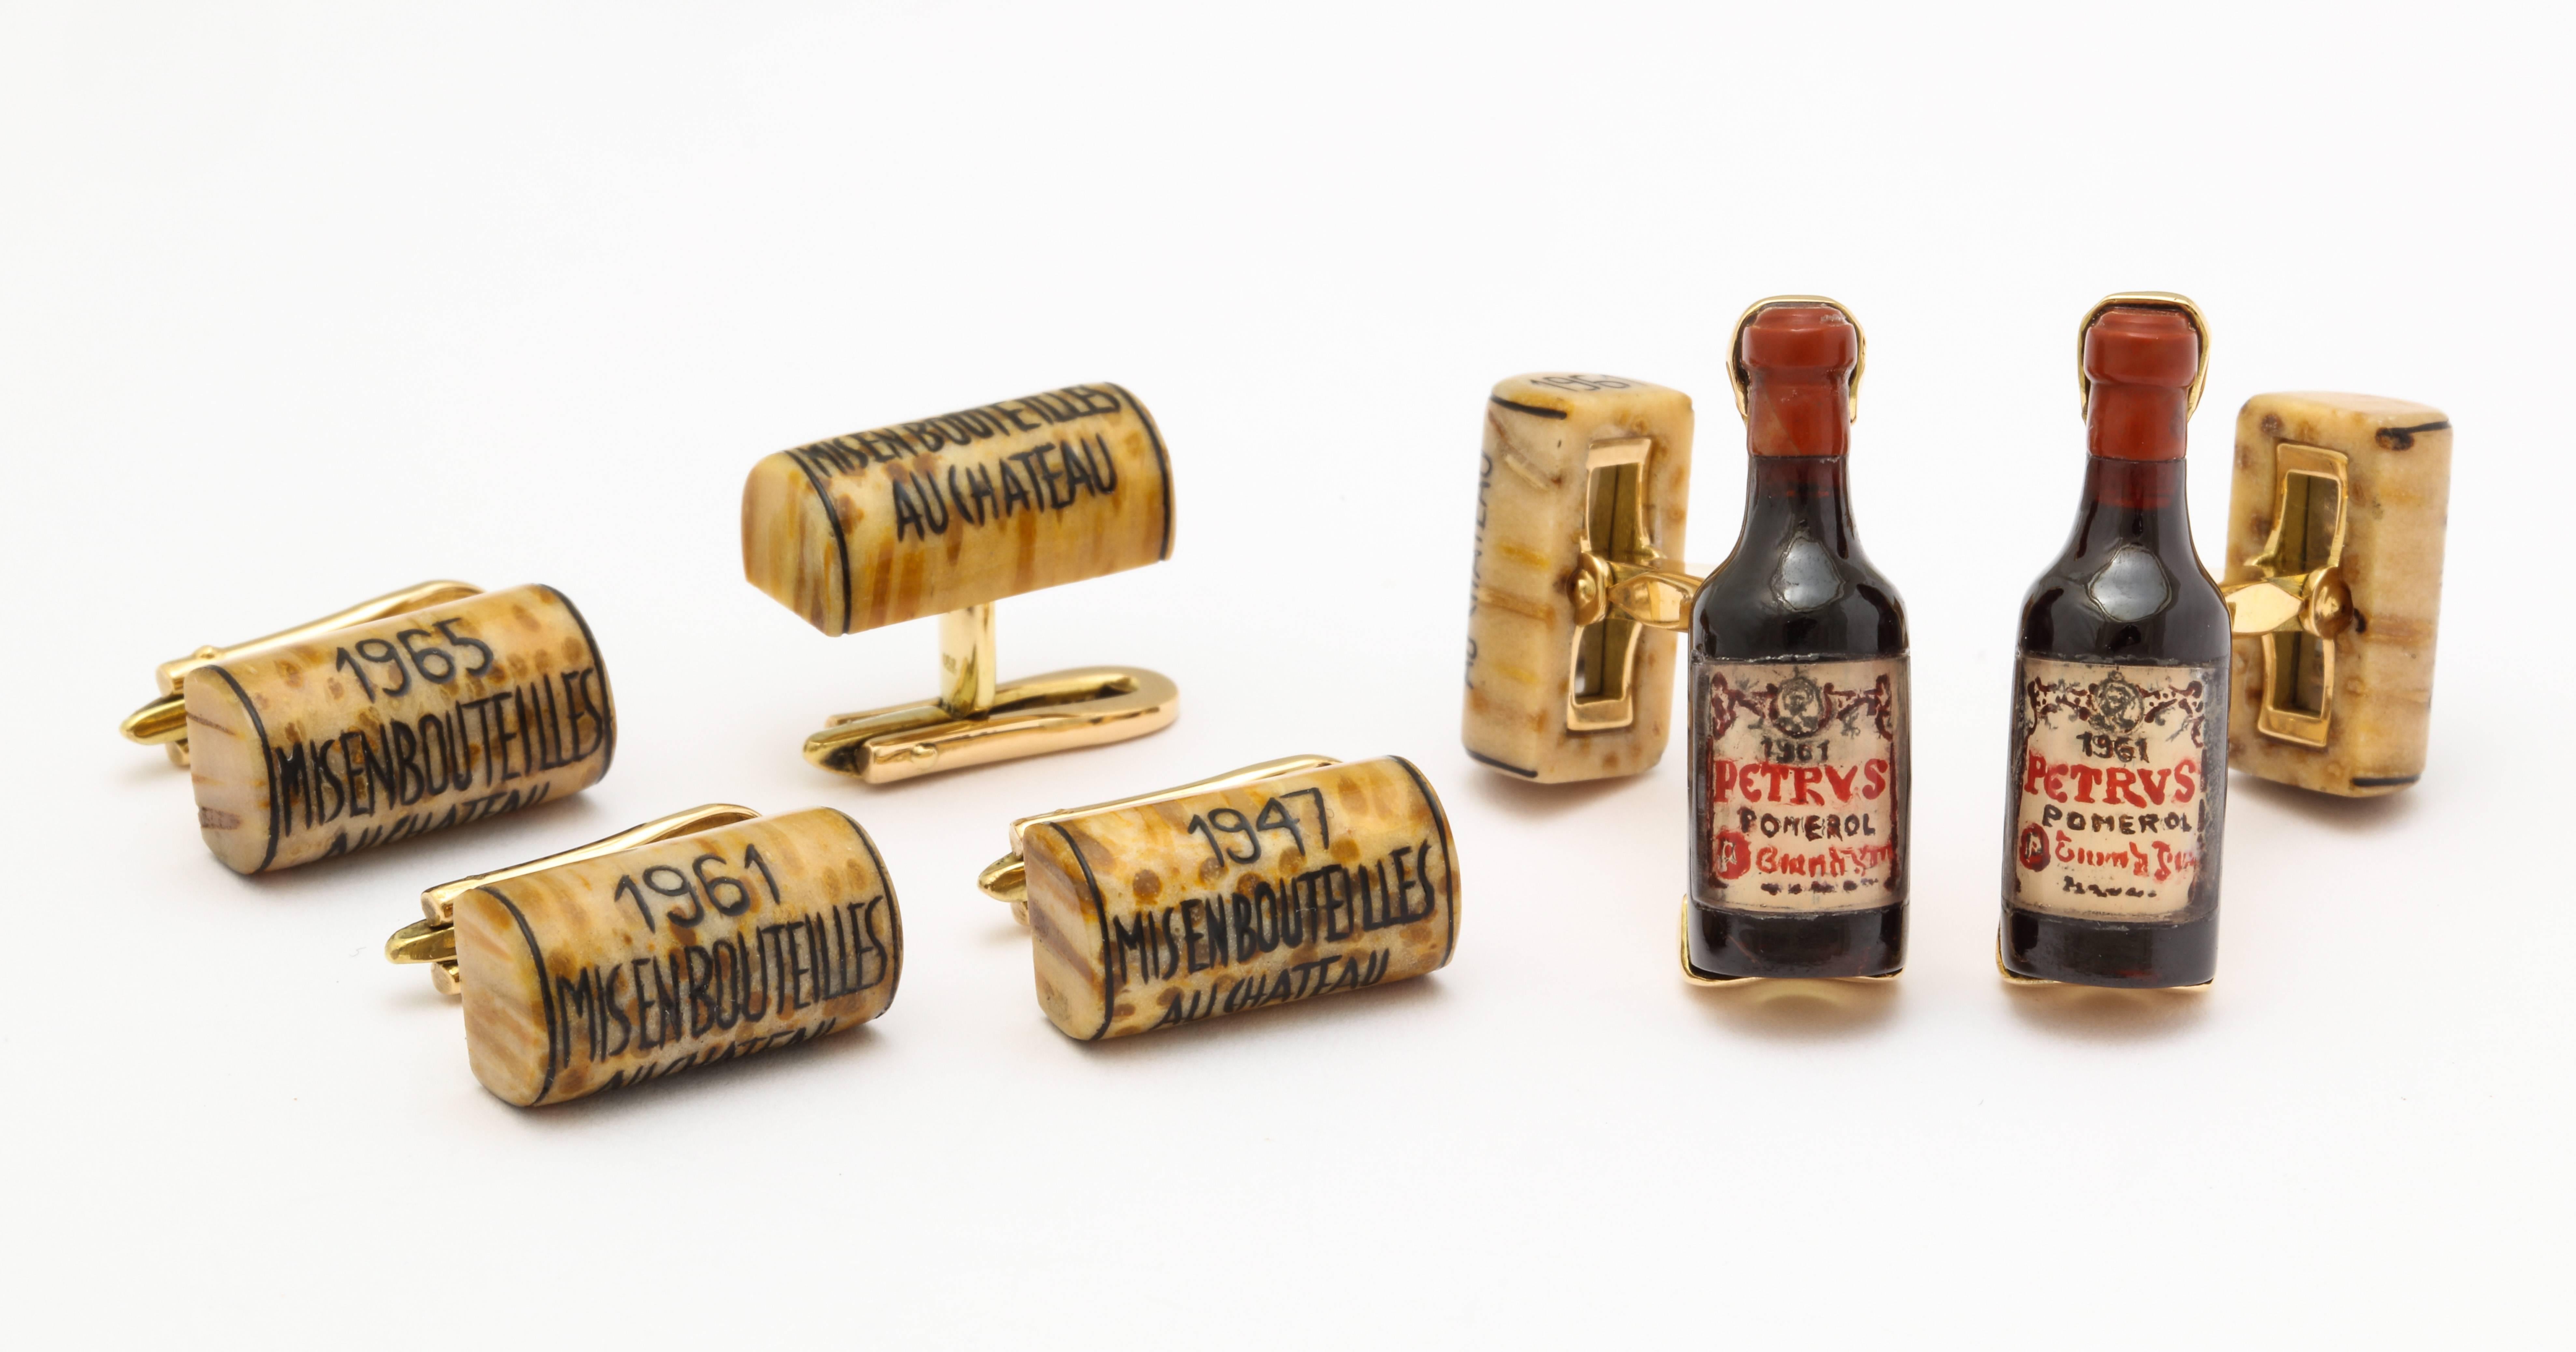 It just doesn't get any better than this.  The set is composed of the finest pair of red wine bottle cufflinks with cork spring backs and four additional cork shirt studs.  Each piece is meticulously hand carved from natural stones and then